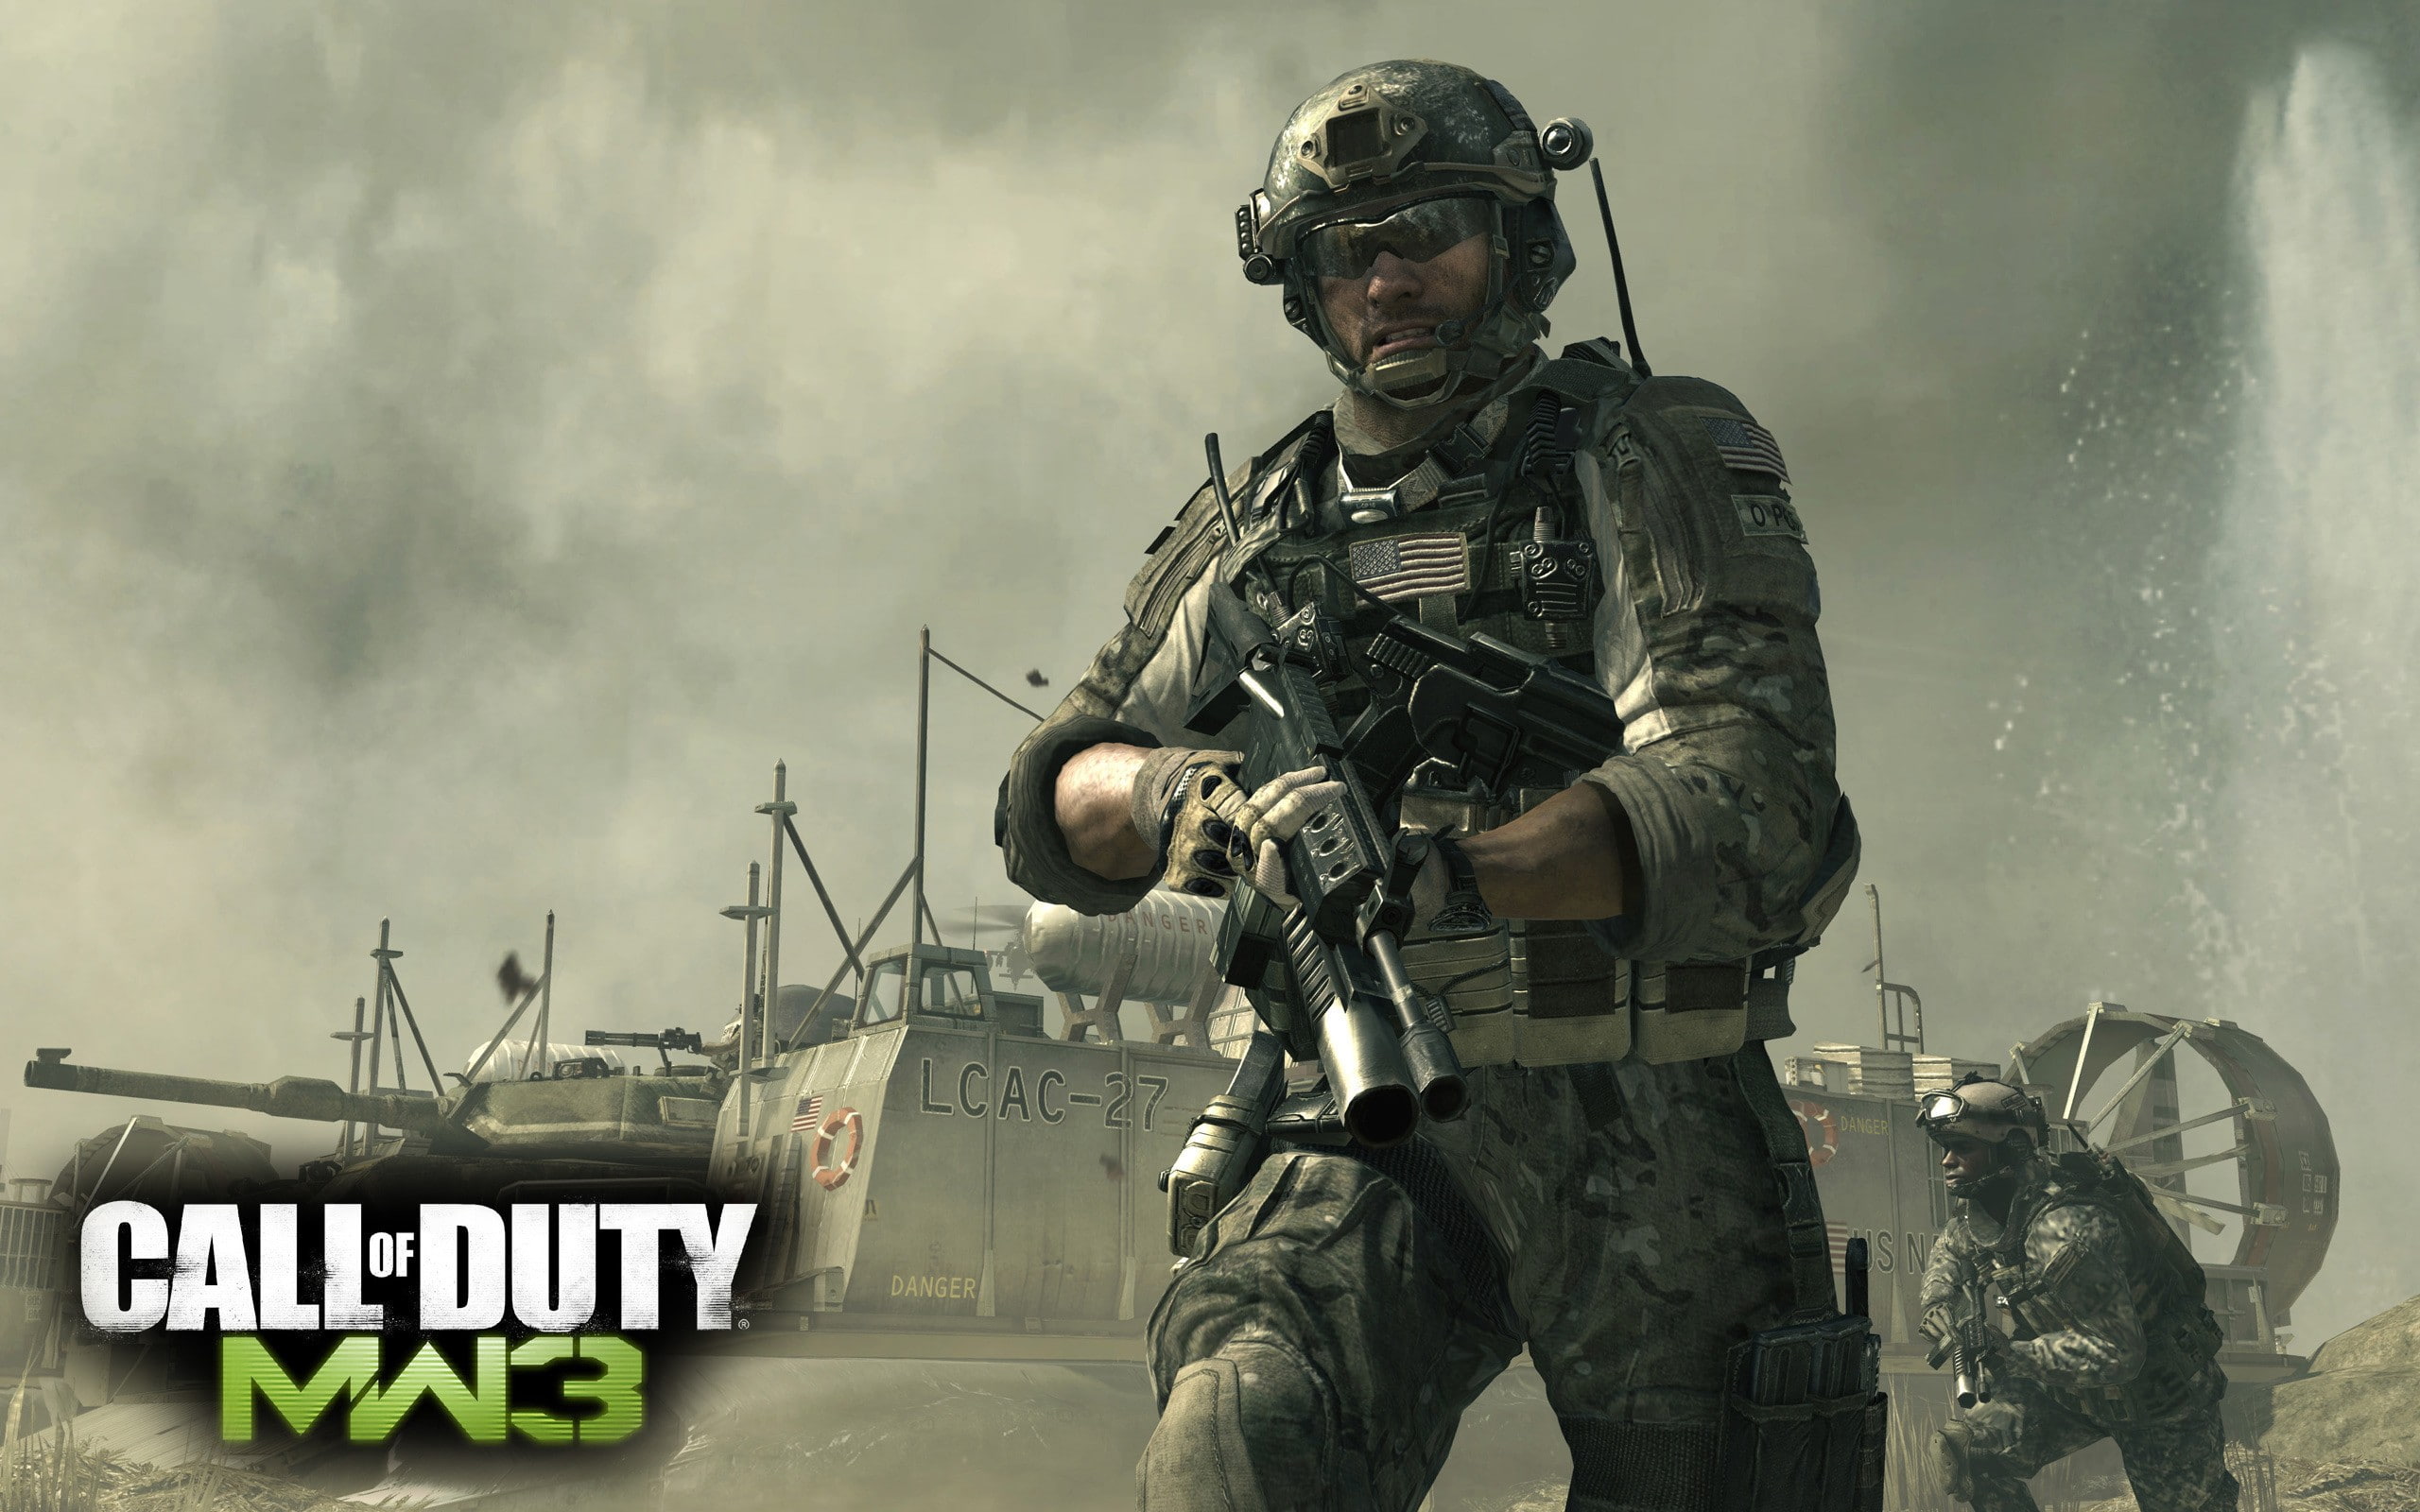 Call of Duty: Modern Warfare 3, video games, soldier, military